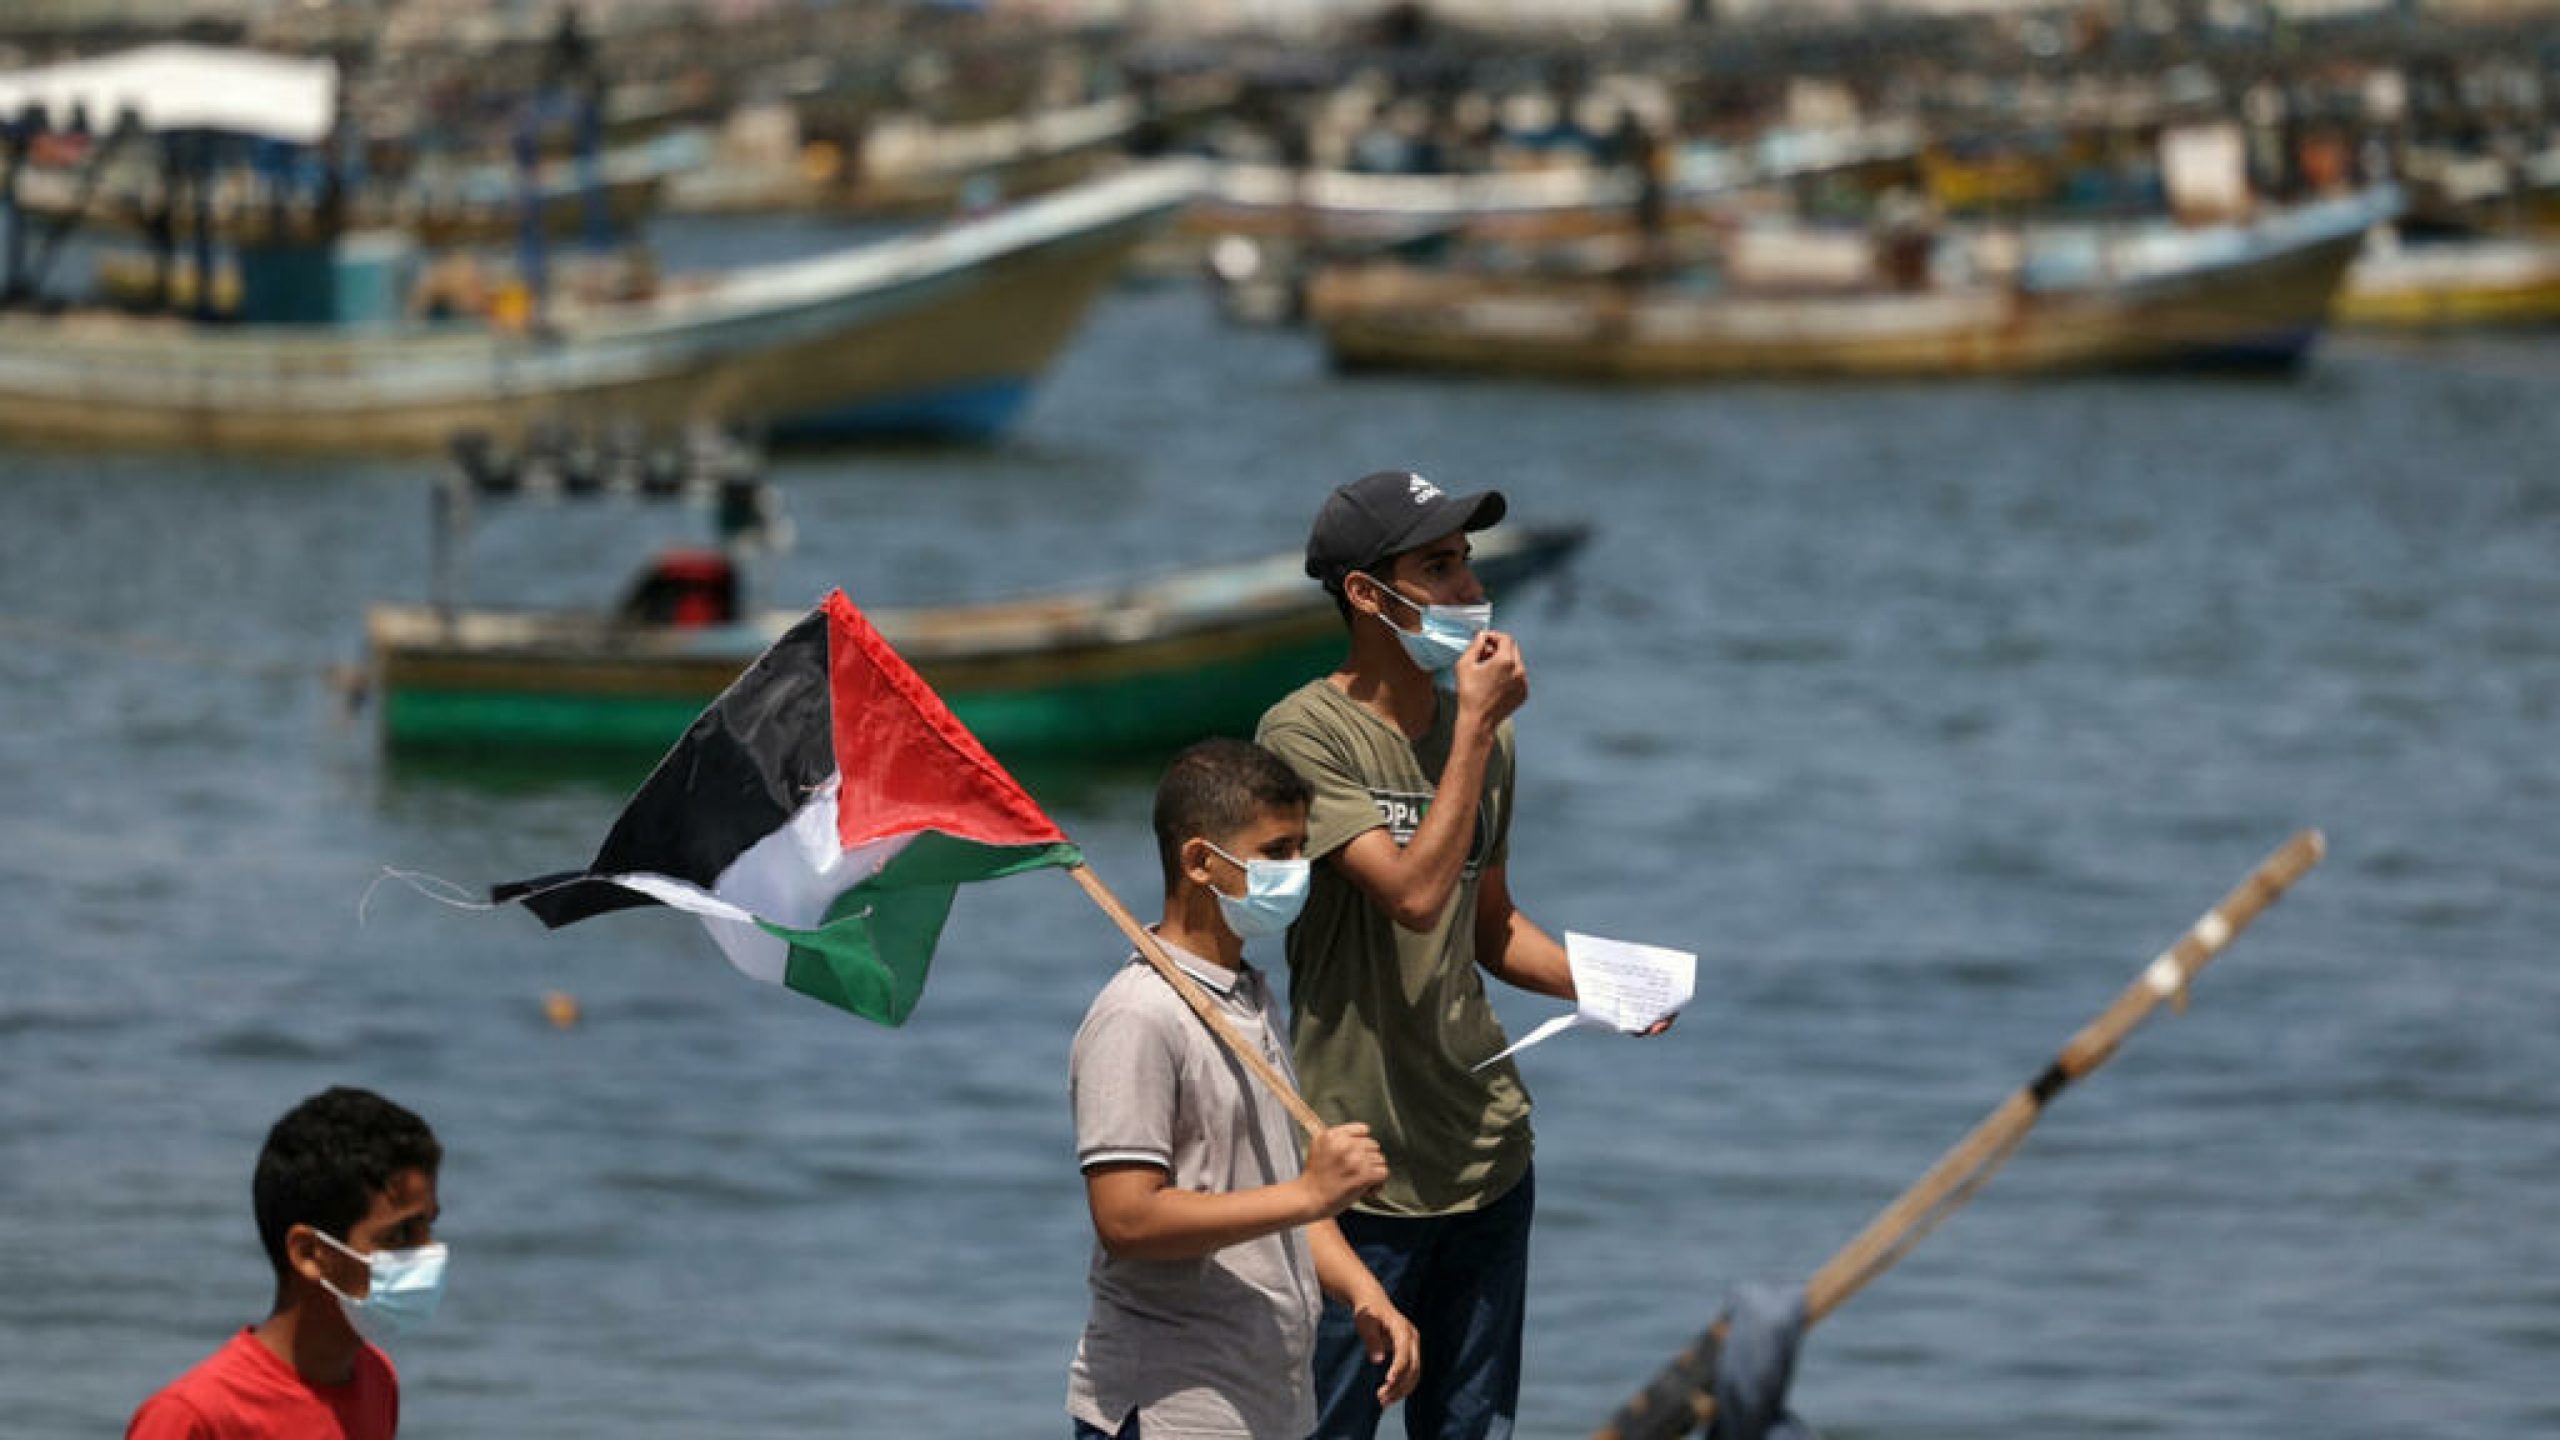 Israel reduces Gaza fishing zone by half after incendiary balloons cause fires